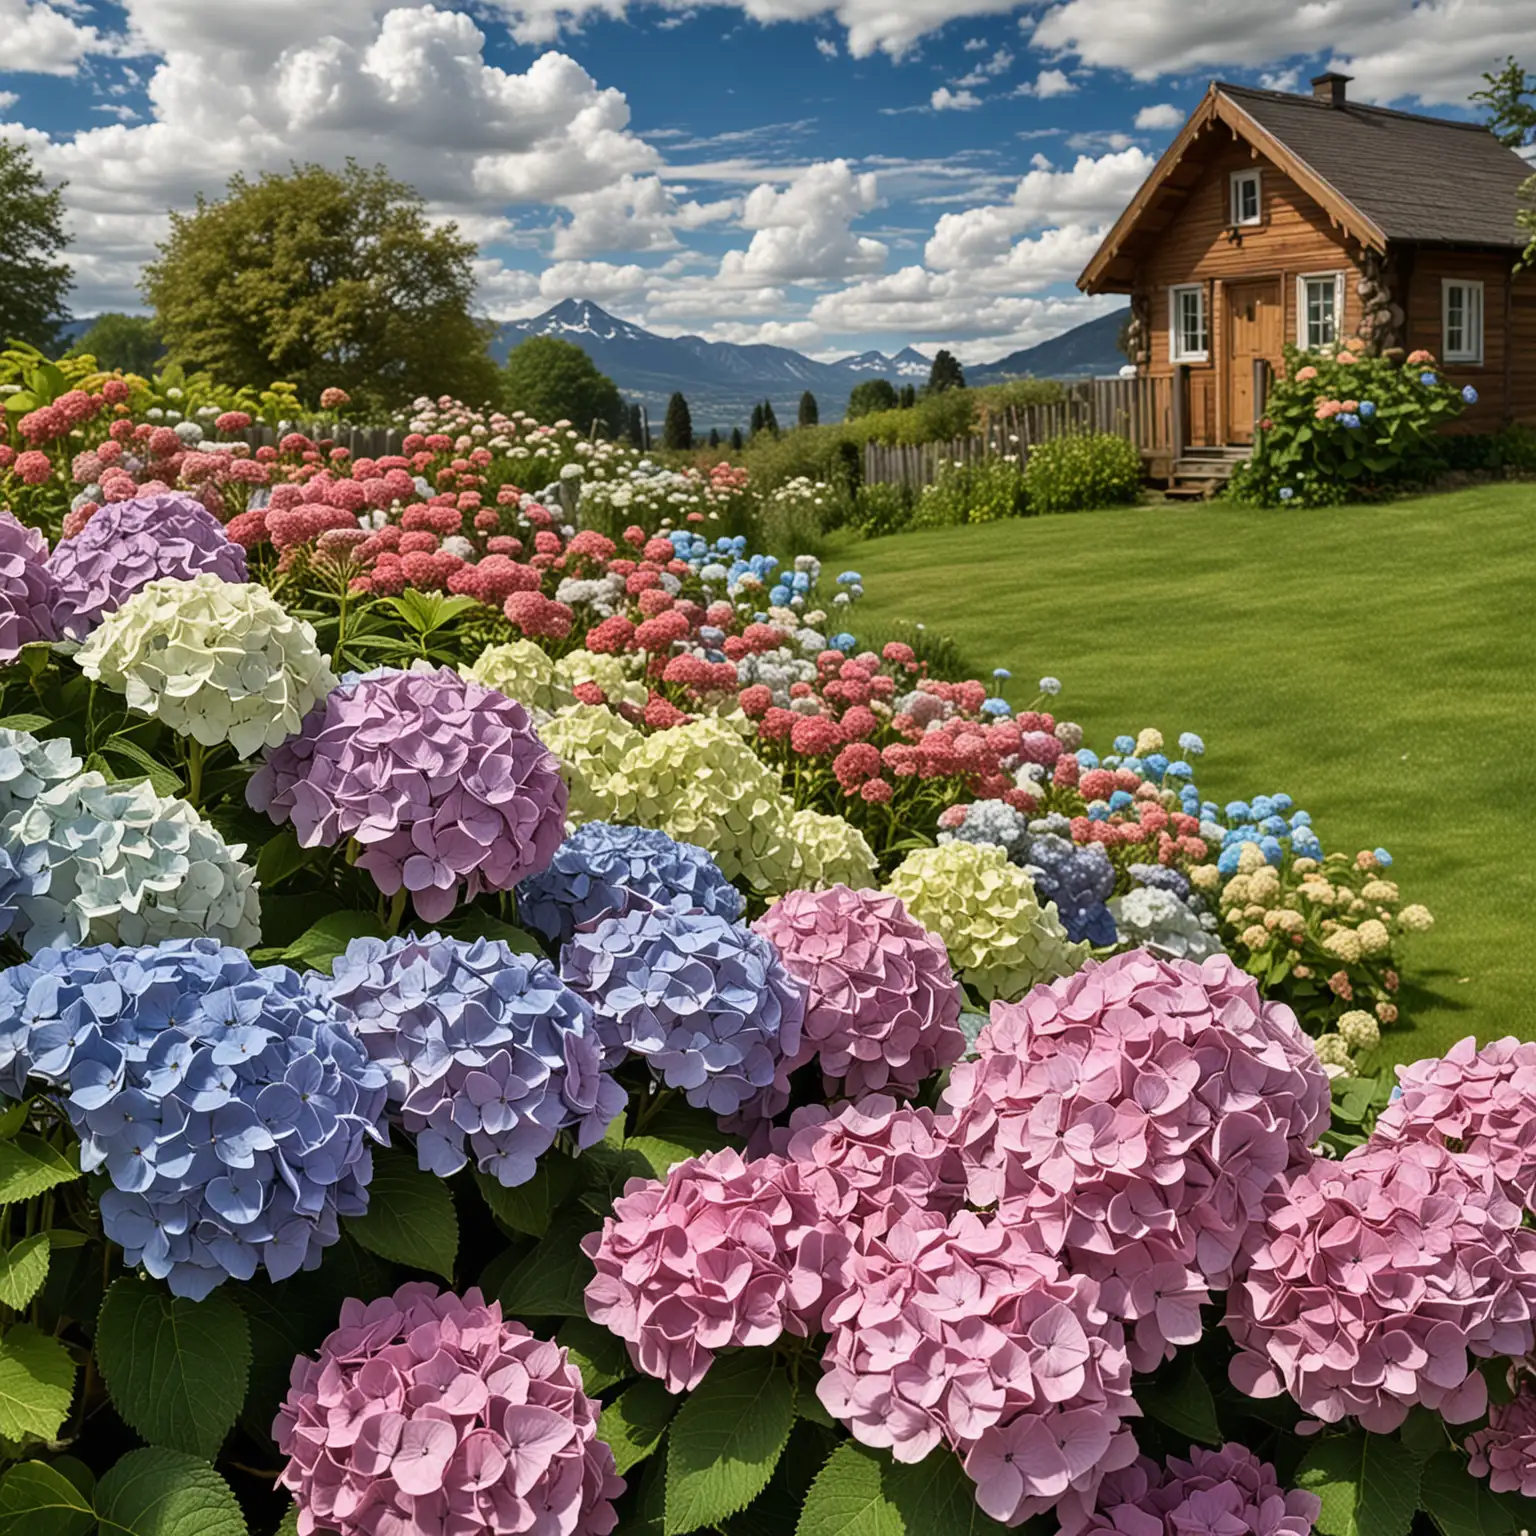 Close-up of a hydrangea field, filled with Hydrangea macrophylla 'Endless Summer' flowers in various colors, with a small wooden house in the distance, on a lawn, under a blue sky with white clouds, and faintly visible mountain range in the background, camera positioned within the flower bed, high resolution, clear texture, adjusted light and shadow